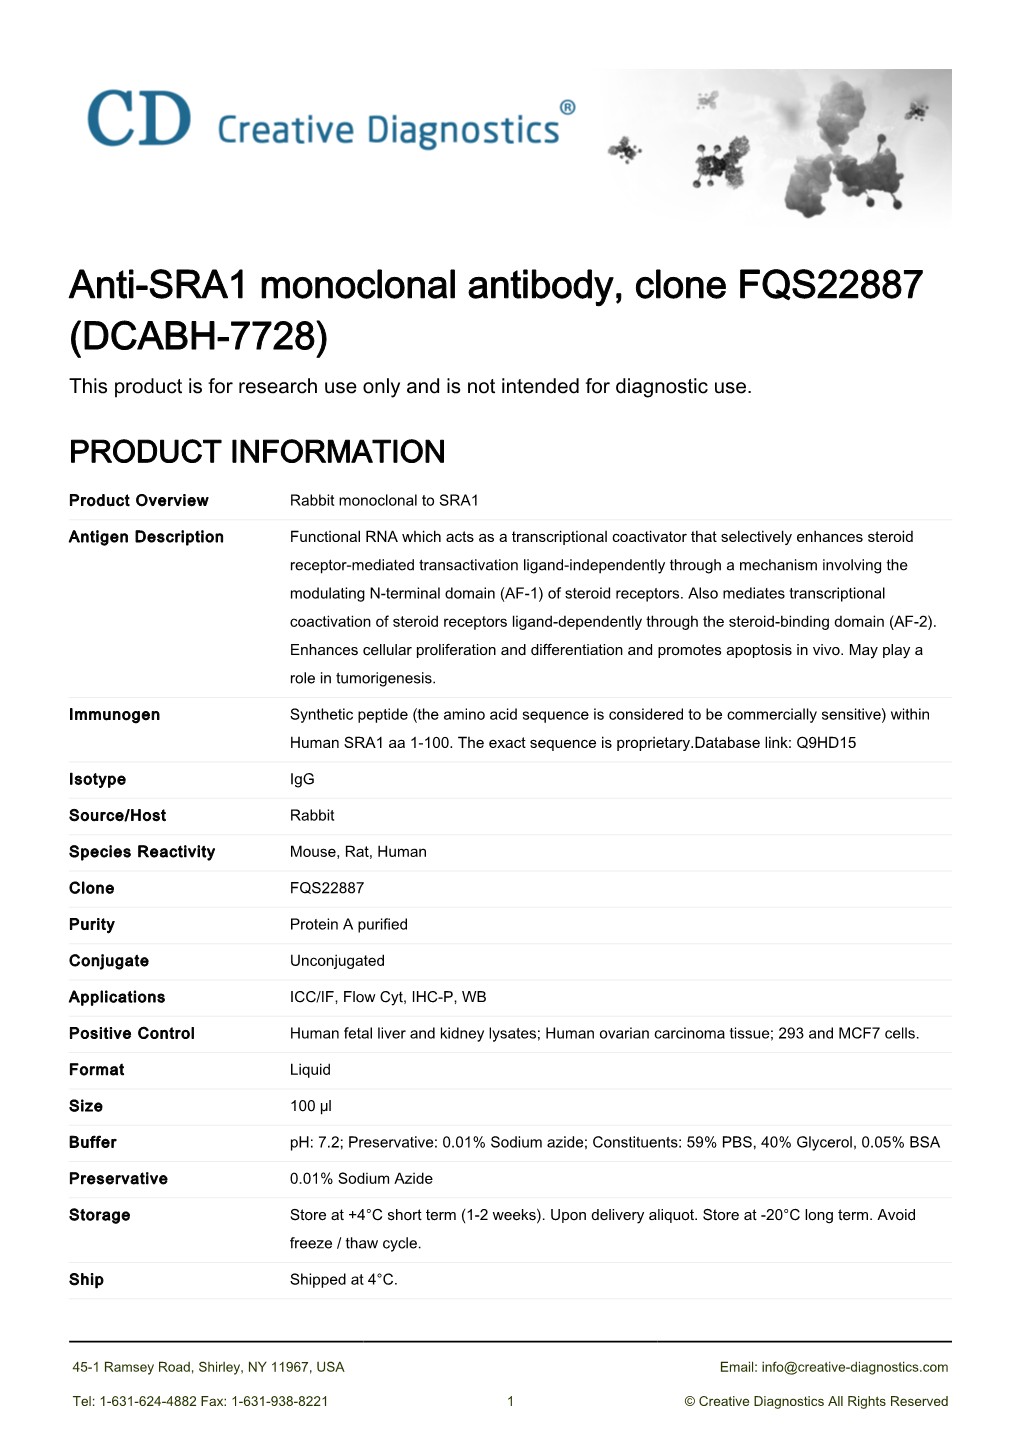 Anti-SRA1 Monoclonal Antibody, Clone FQS22887 (DCABH-7728) This Product Is for Research Use Only and Is Not Intended for Diagnostic Use